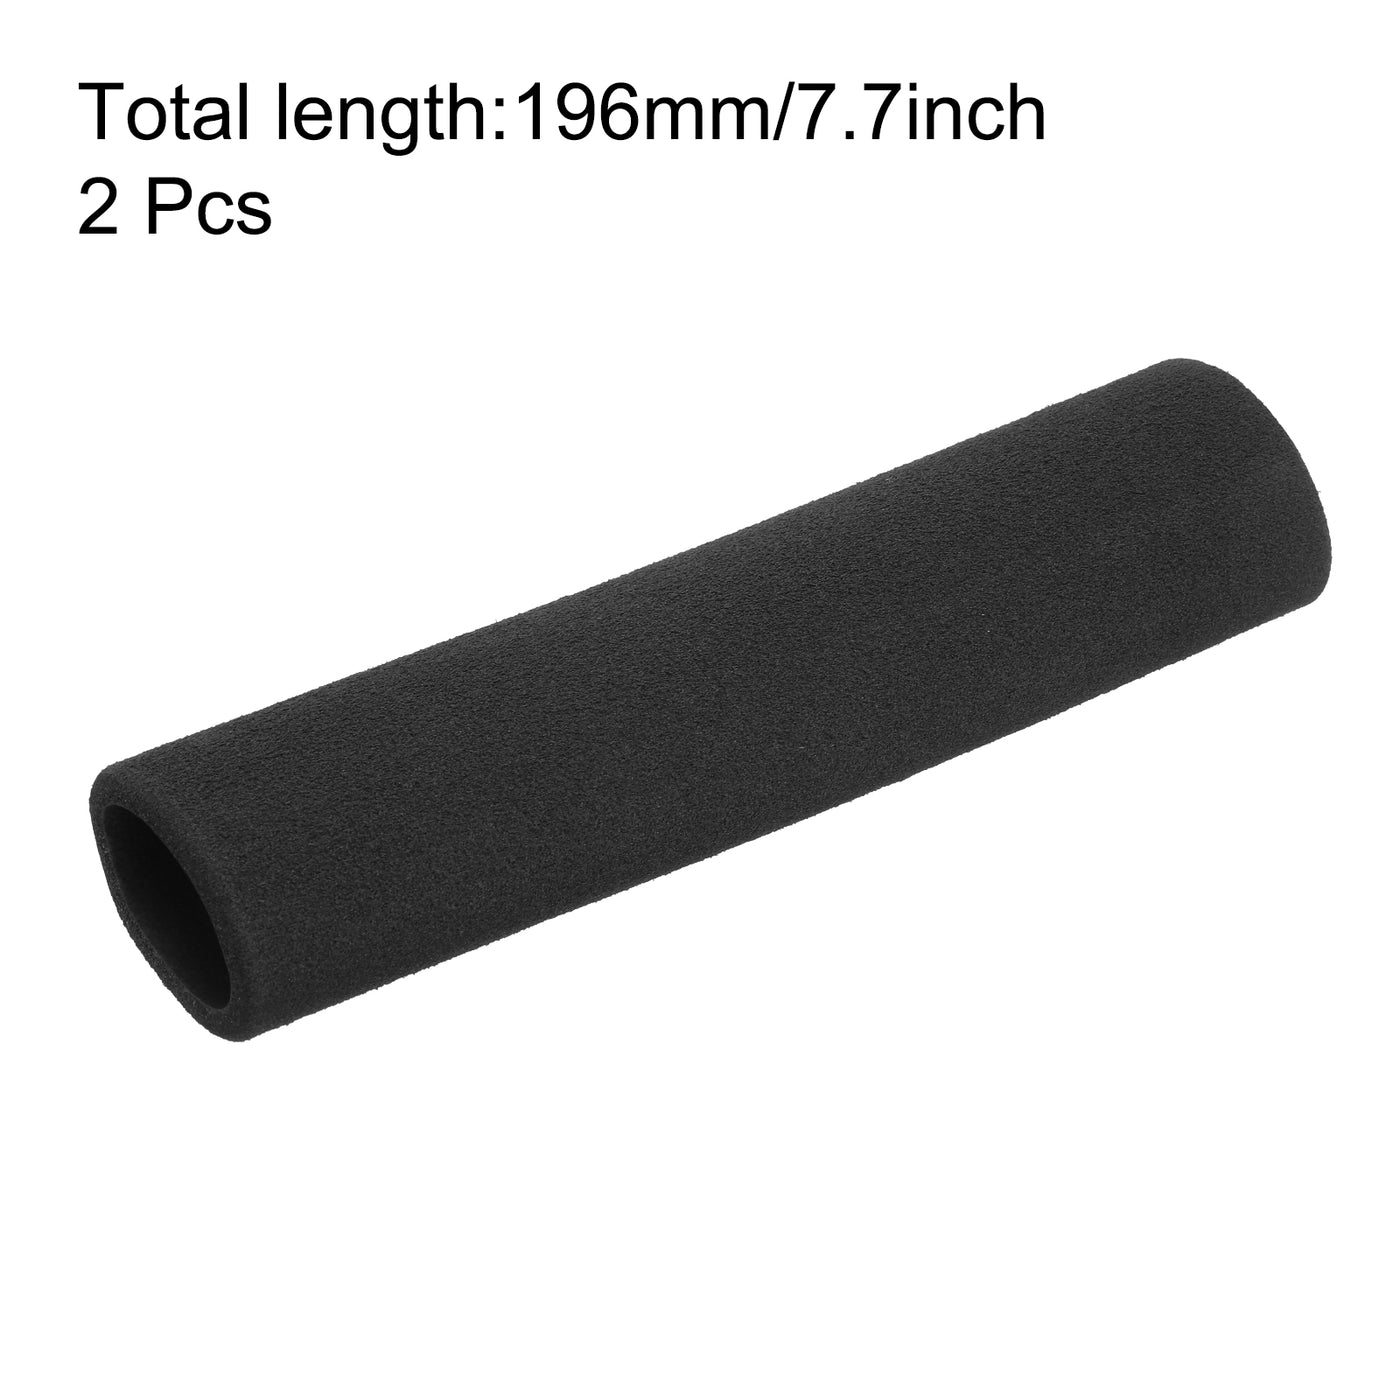 uxcell Uxcell Pipe Insulation Tube Foam Tubing for Handle Grip Support 31mm ID 41mm OD 196mm Heat Preservation Black 2pcs